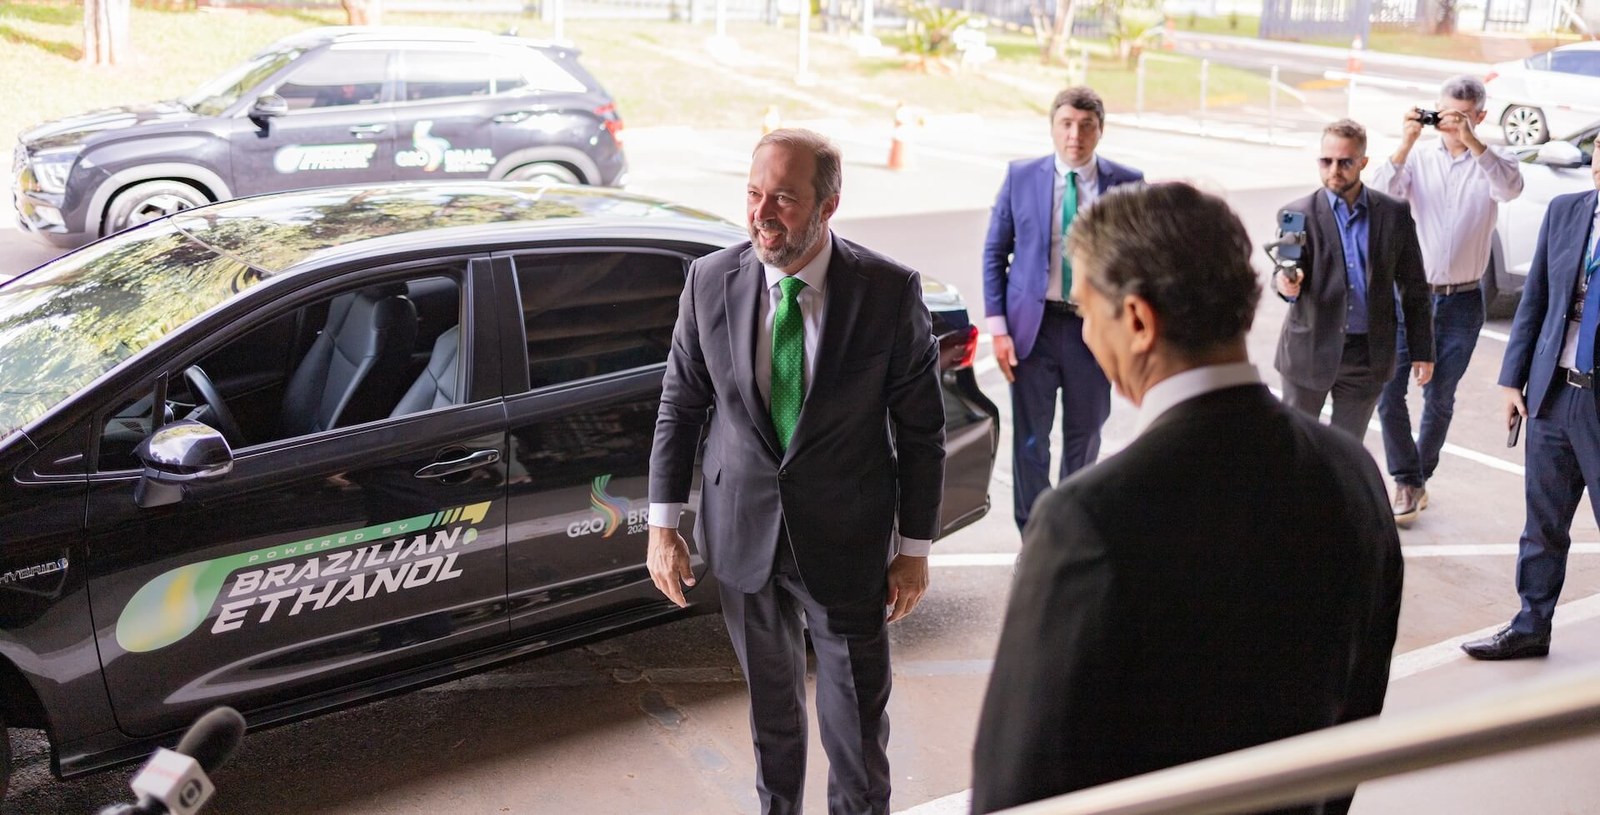 Minister Alexandre Silveira arrives at the G20 headquarters driving a flex-fuel car. Credito: Audiovisual G20 Brasil